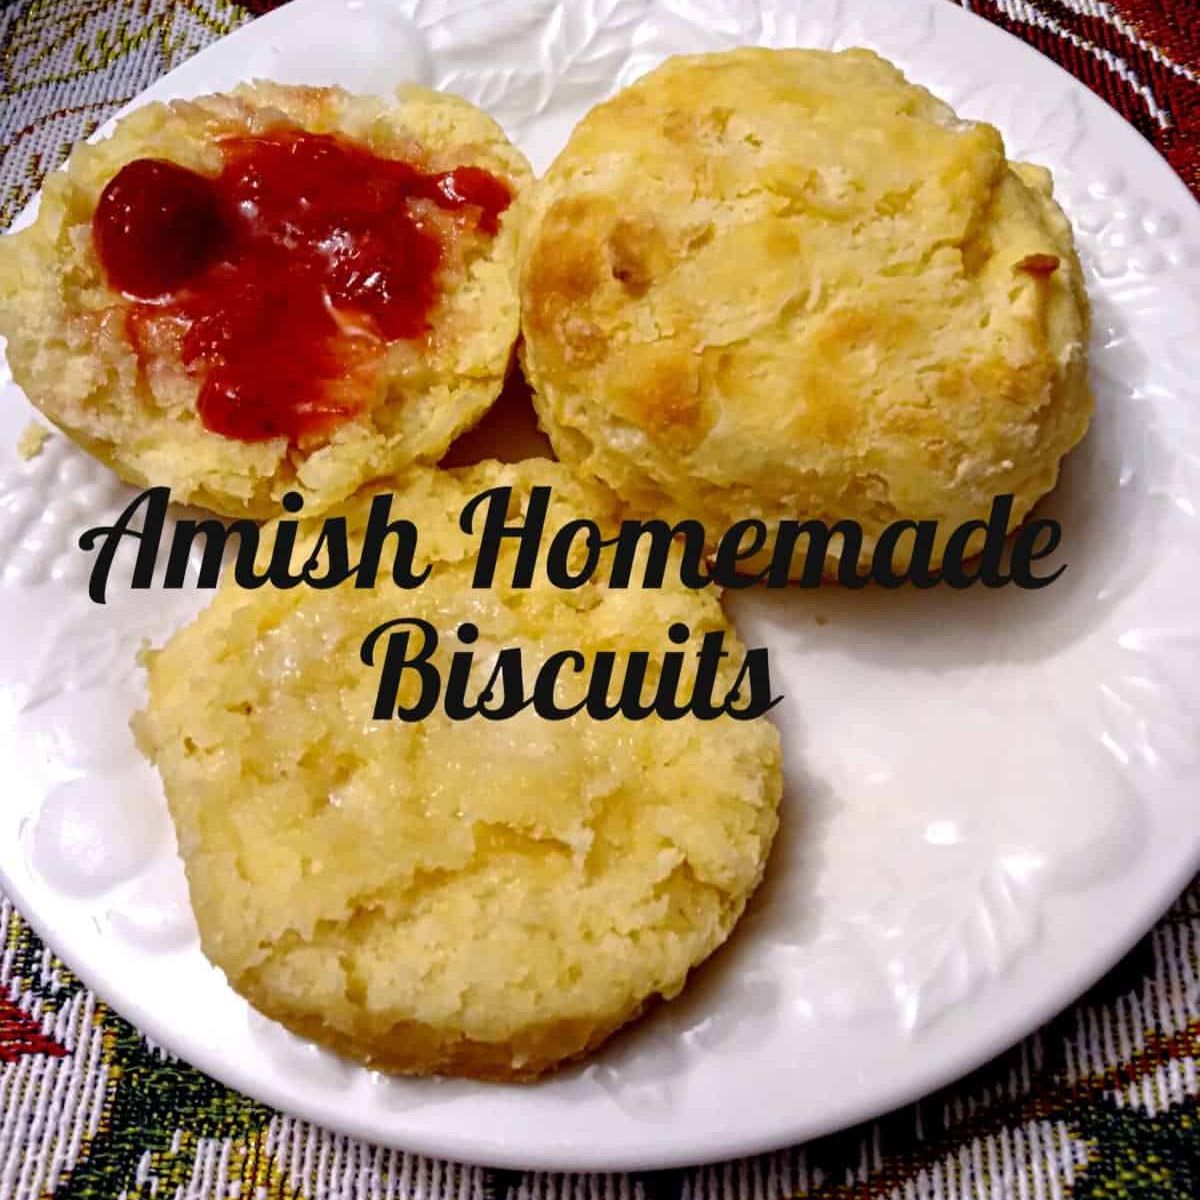 Amish buttermilk biscuits on a plate, one is cut in half and spread with butter and strawberry jam.